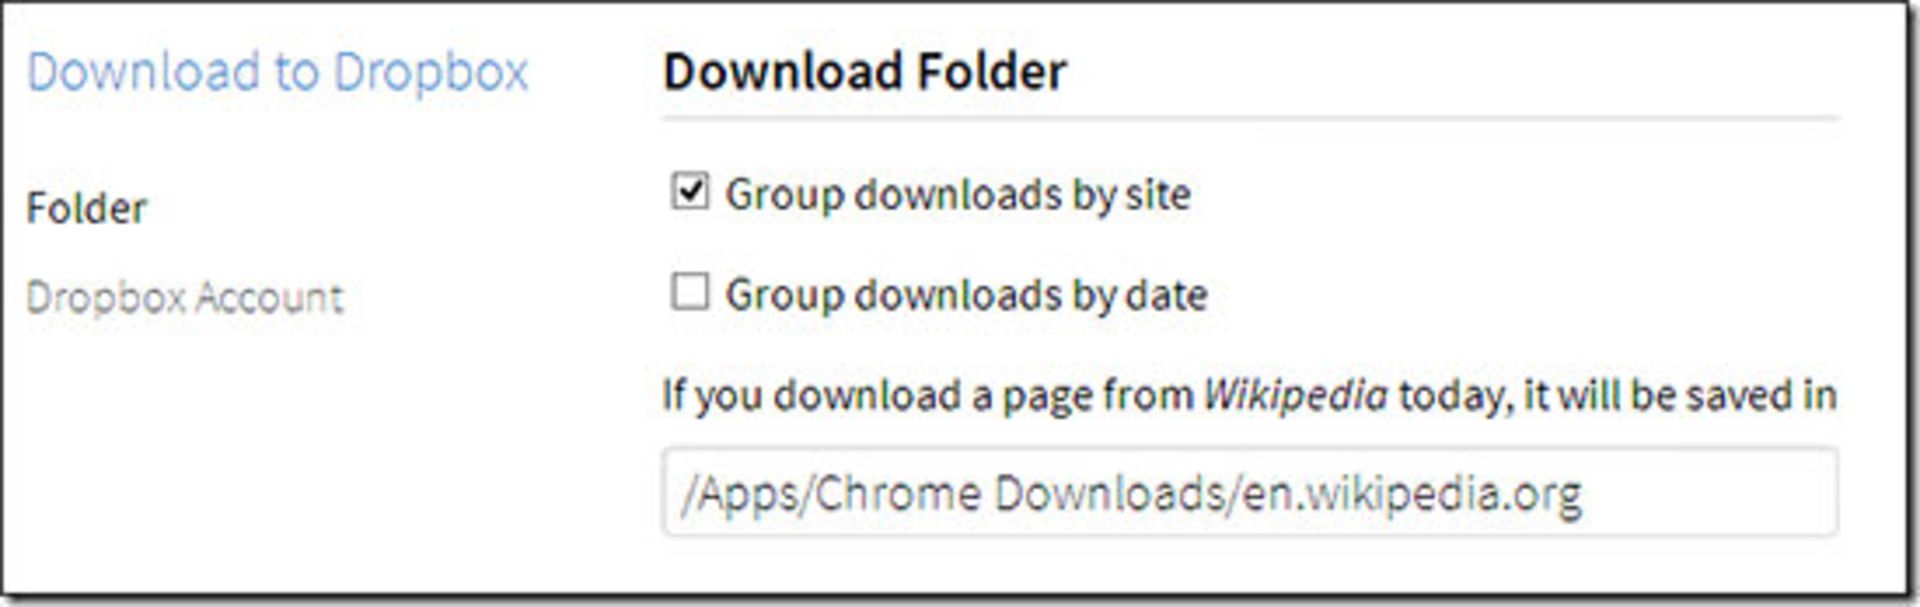 download-to-dropbox-2